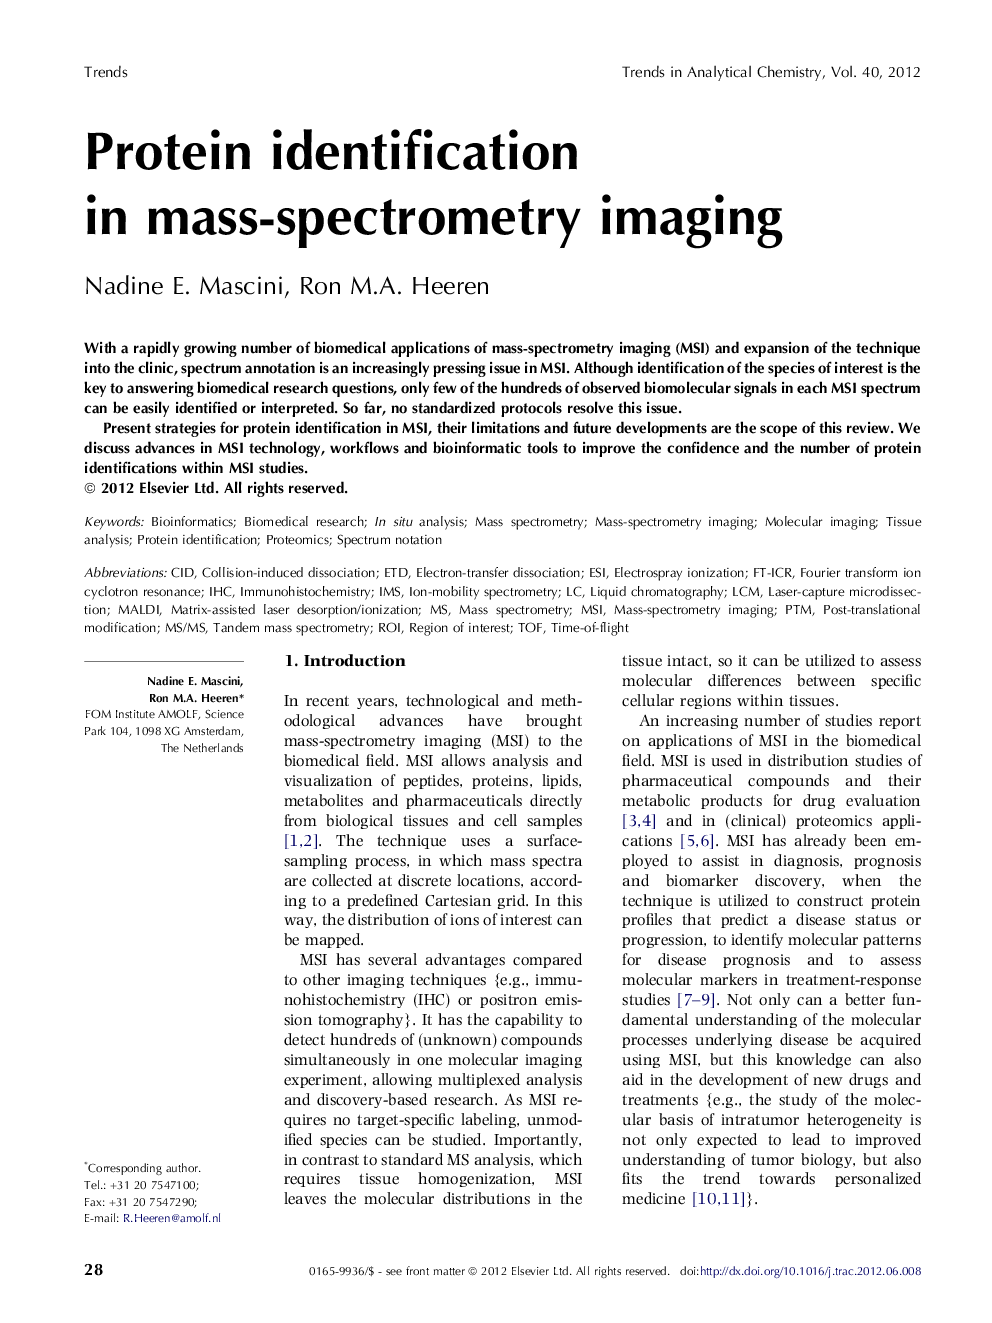 Protein identification in mass-spectrometry imaging